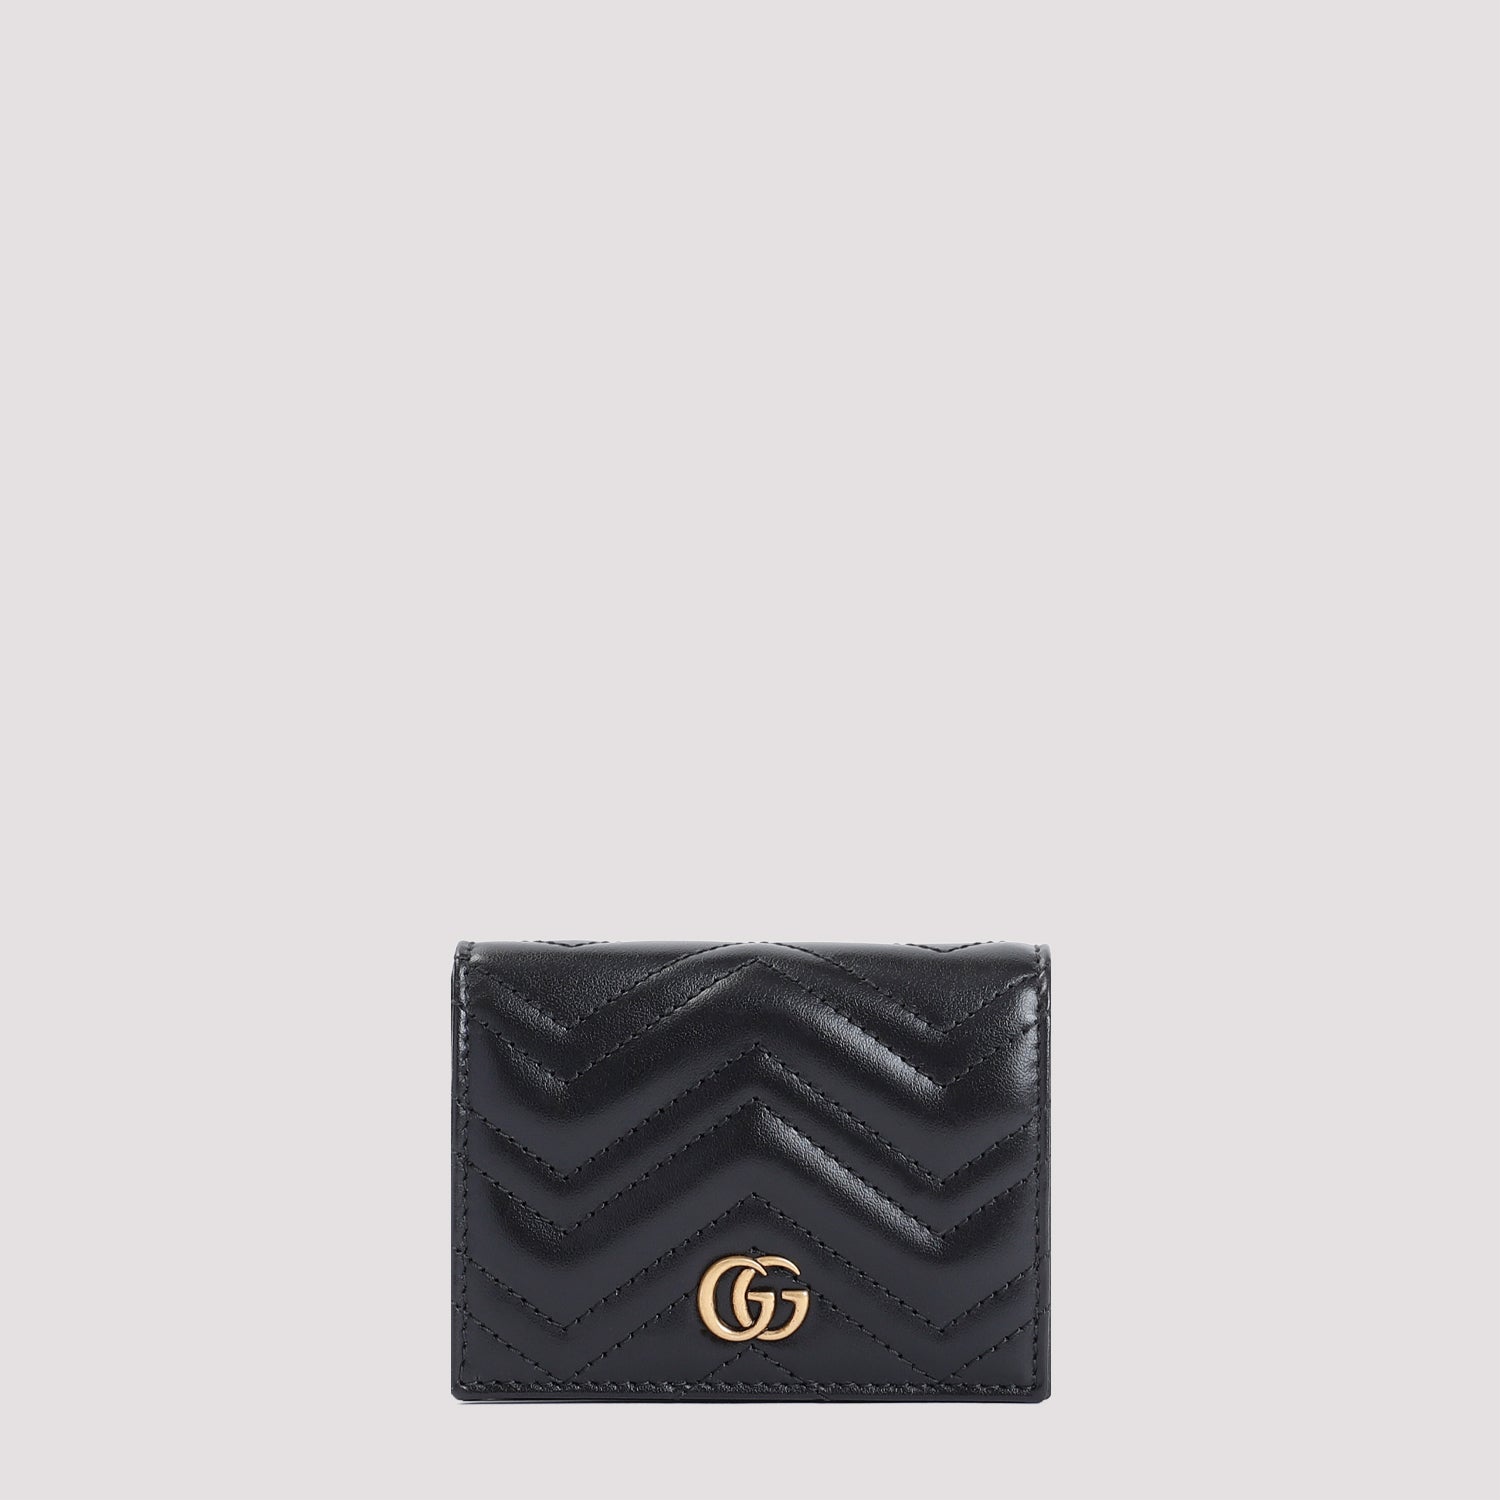 Gucci Black Gg Marmont 2.0 Leather Credit Card Case